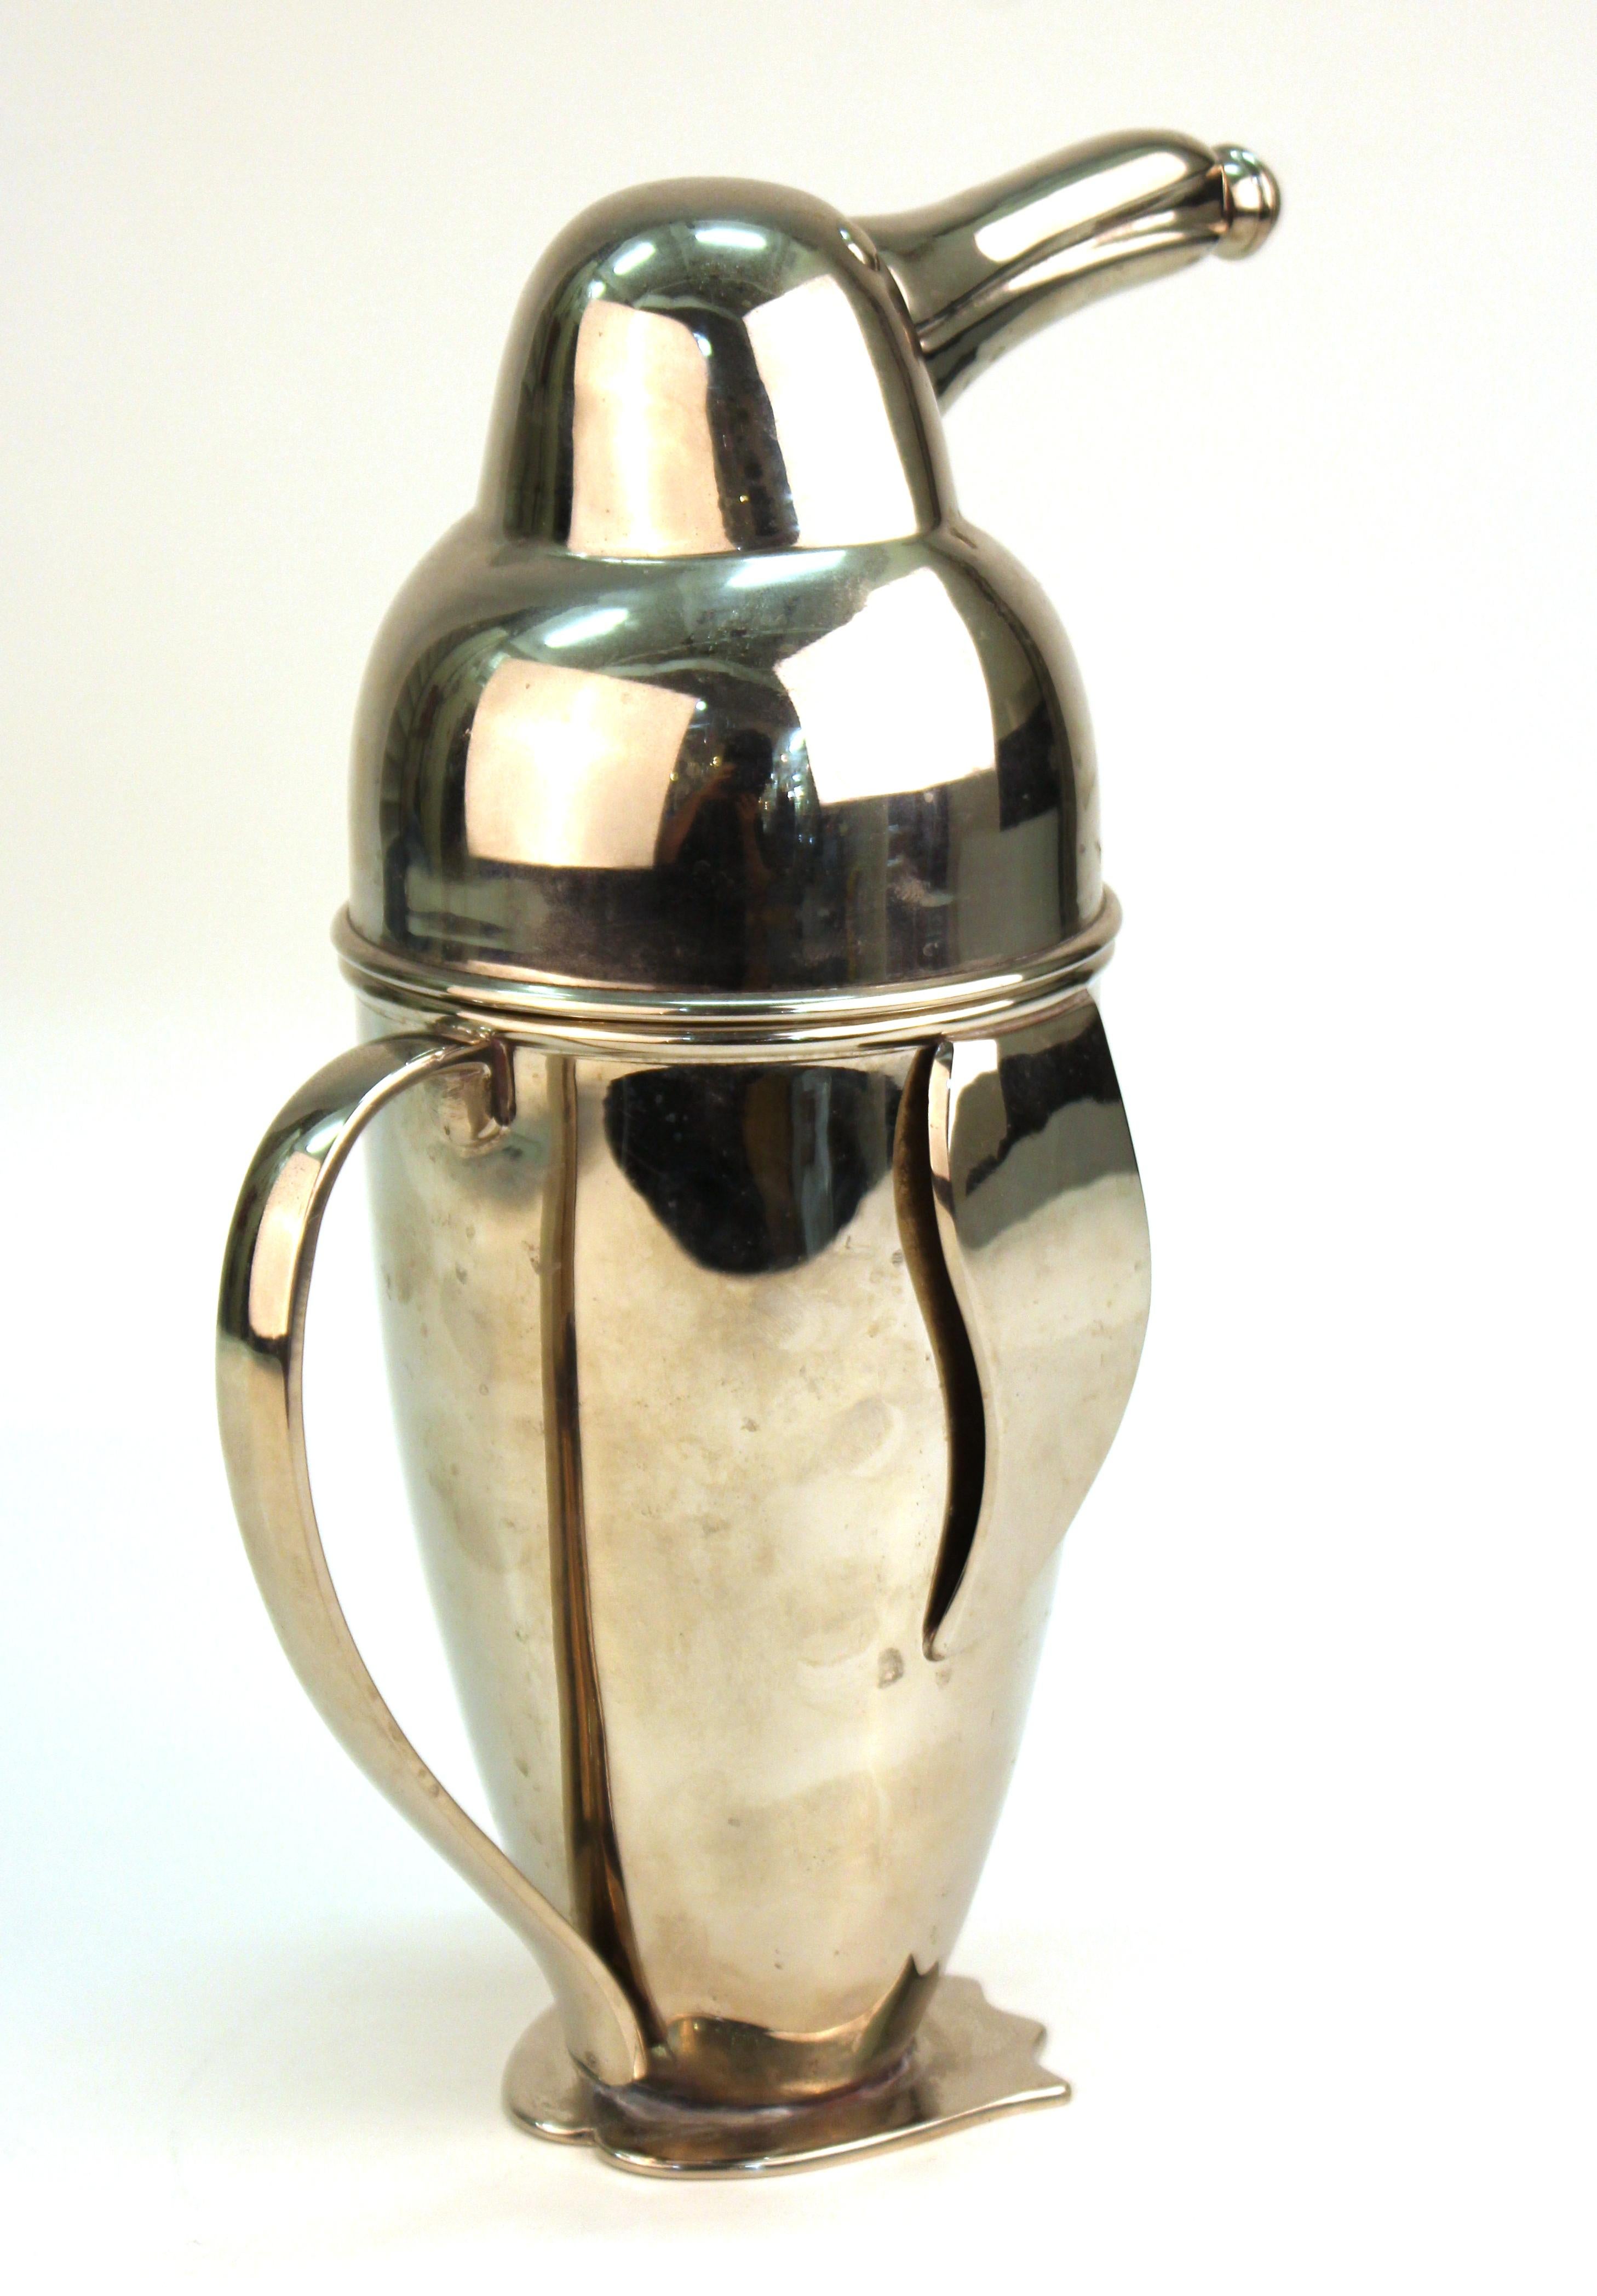 20th Century Napier Style Penguin Cocktail Shaker in Stainless Steel